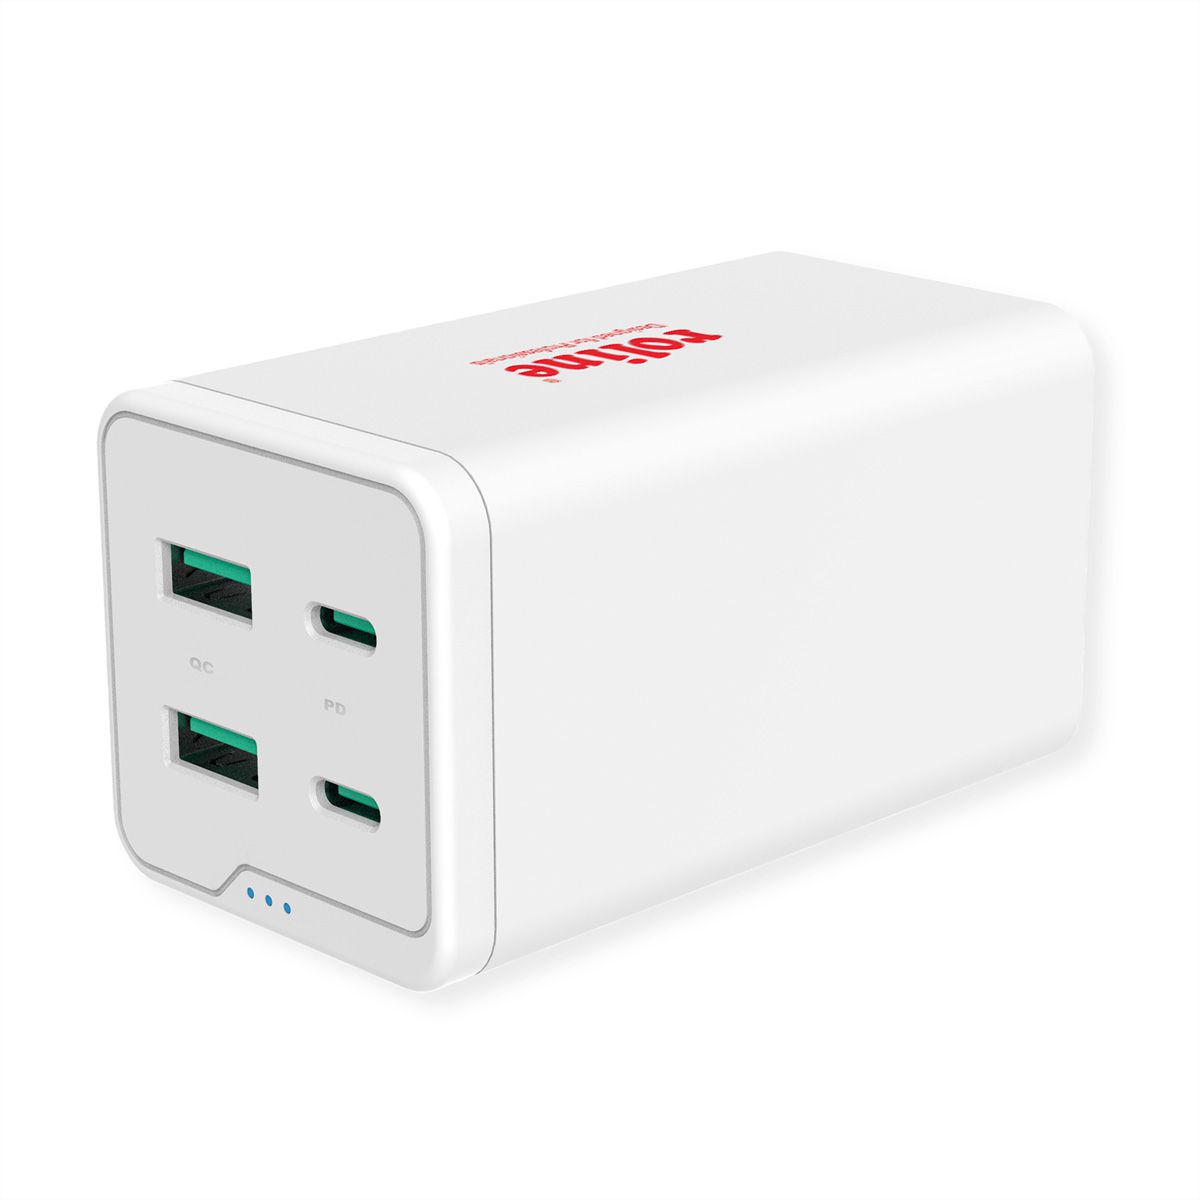 Chargeur Tablette 5.0V 2.0A - CAPMICRO